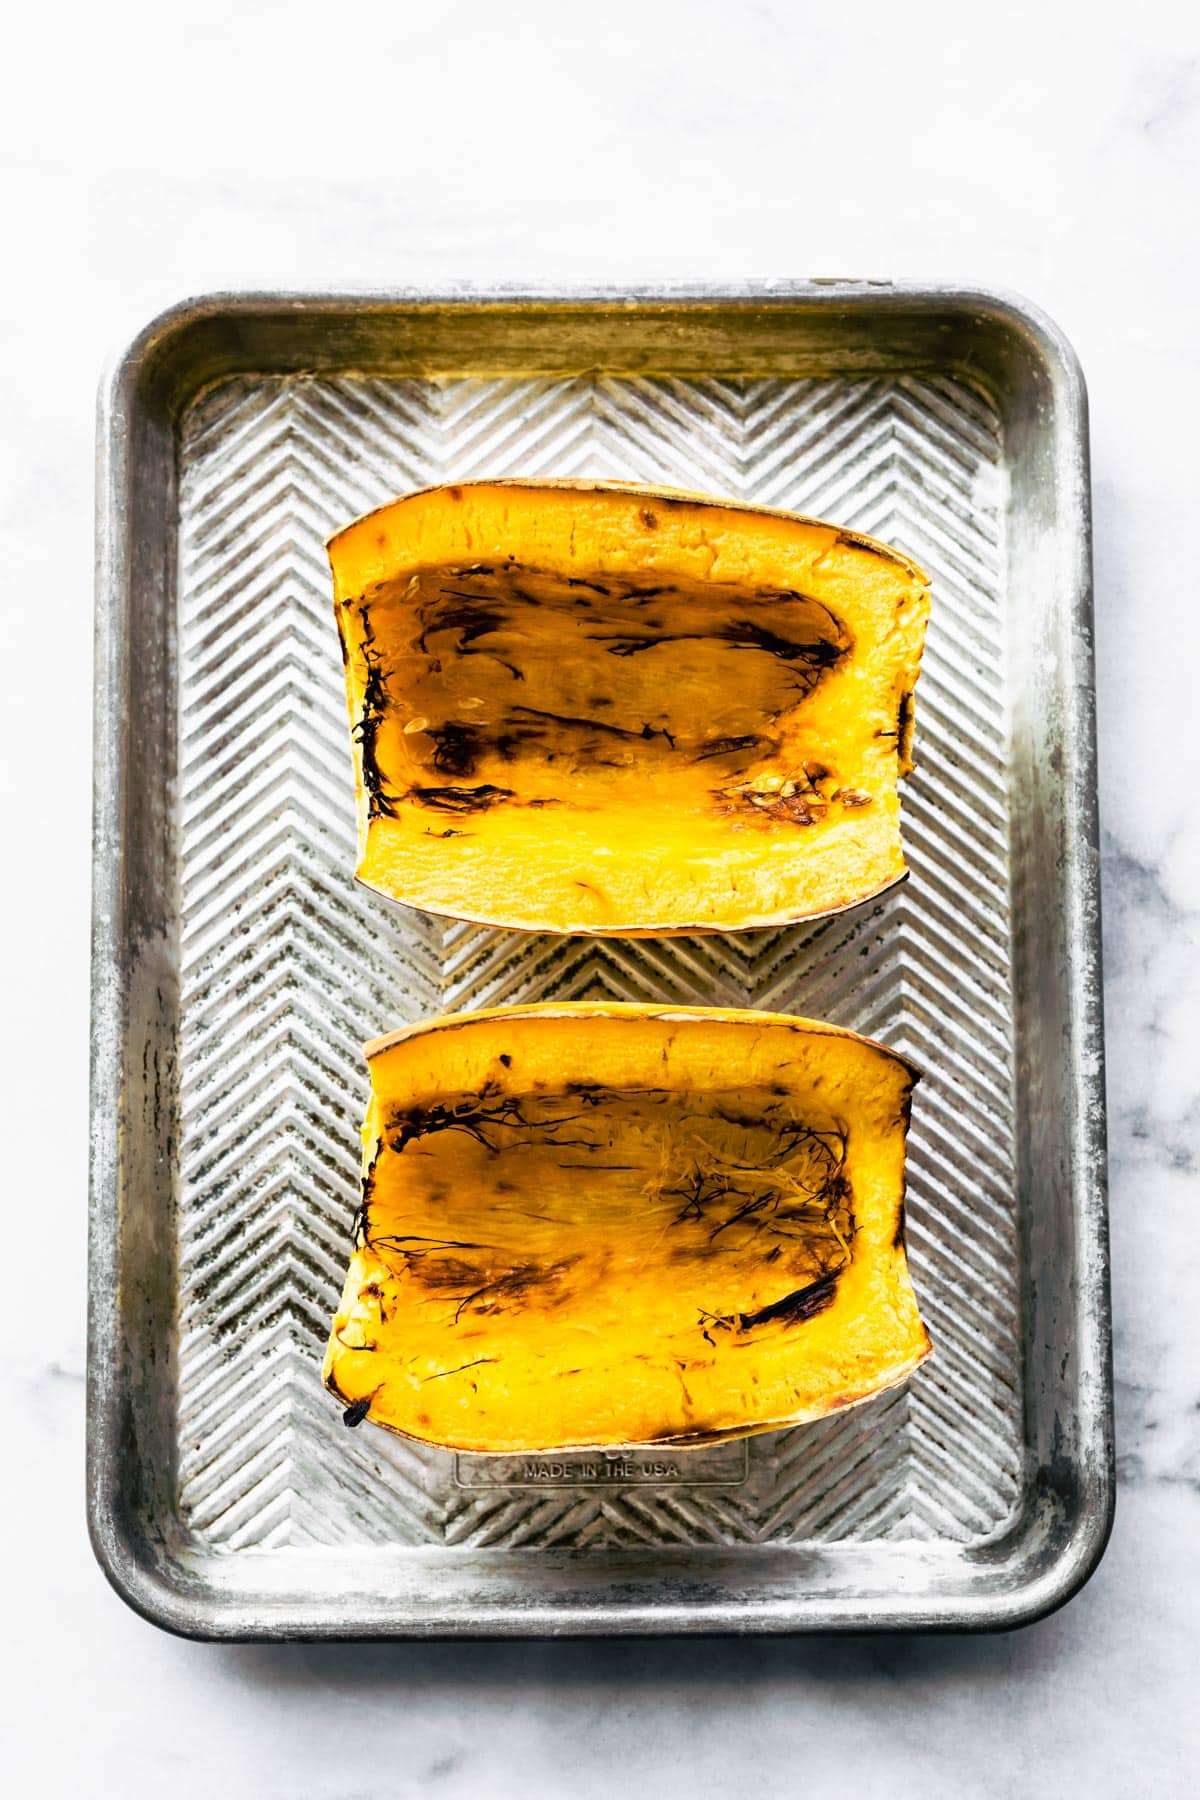 Two halves of baked spaghetti squash on a baking sheet.